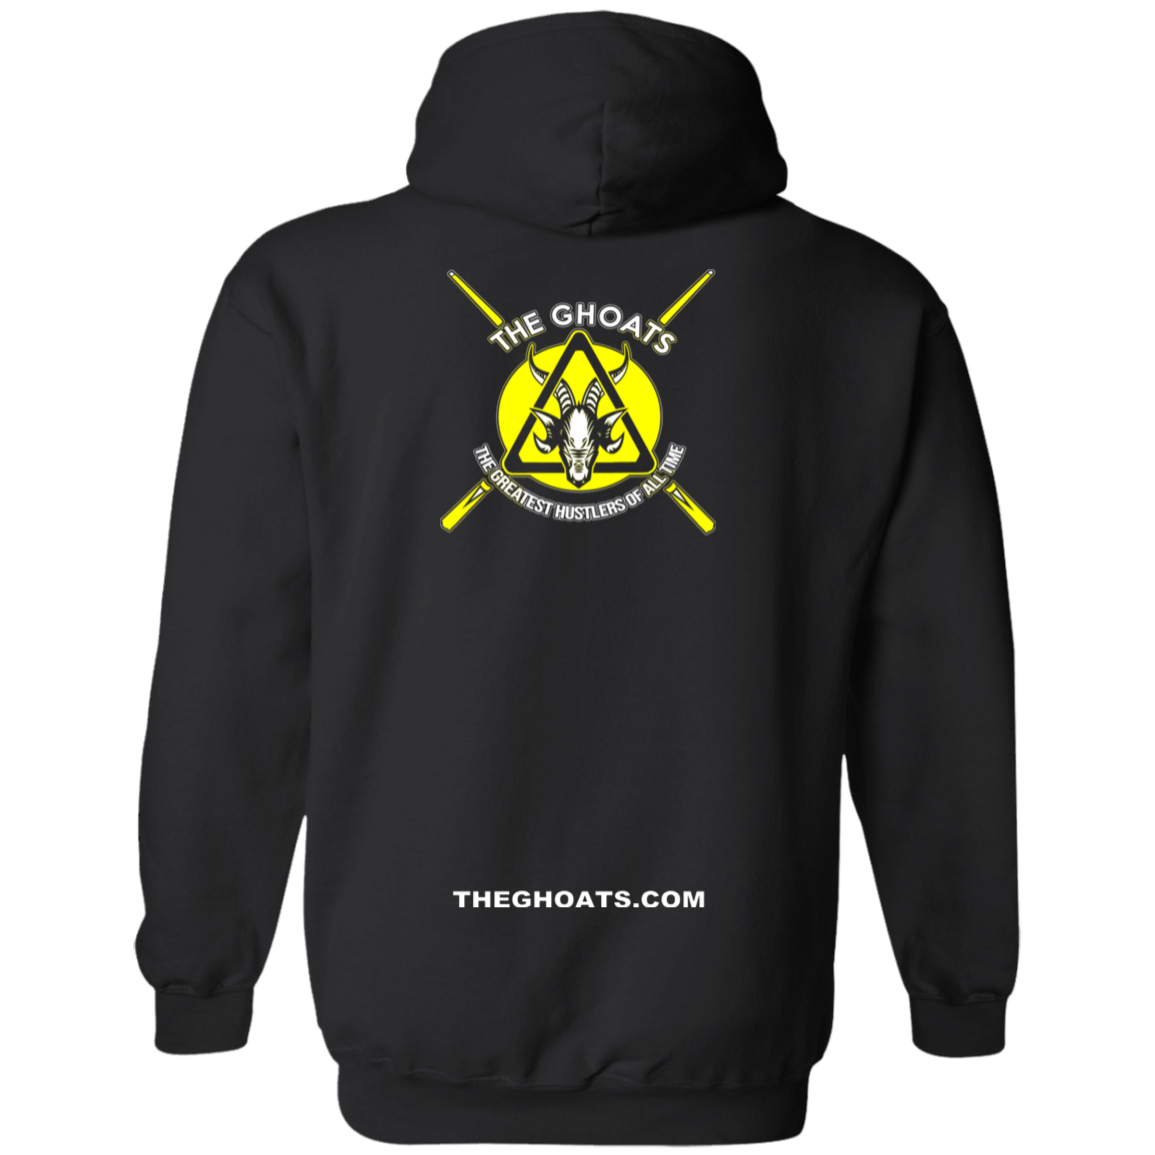 The GHOATS Custom Design #1. Active Shooter. Pullover Hoodie